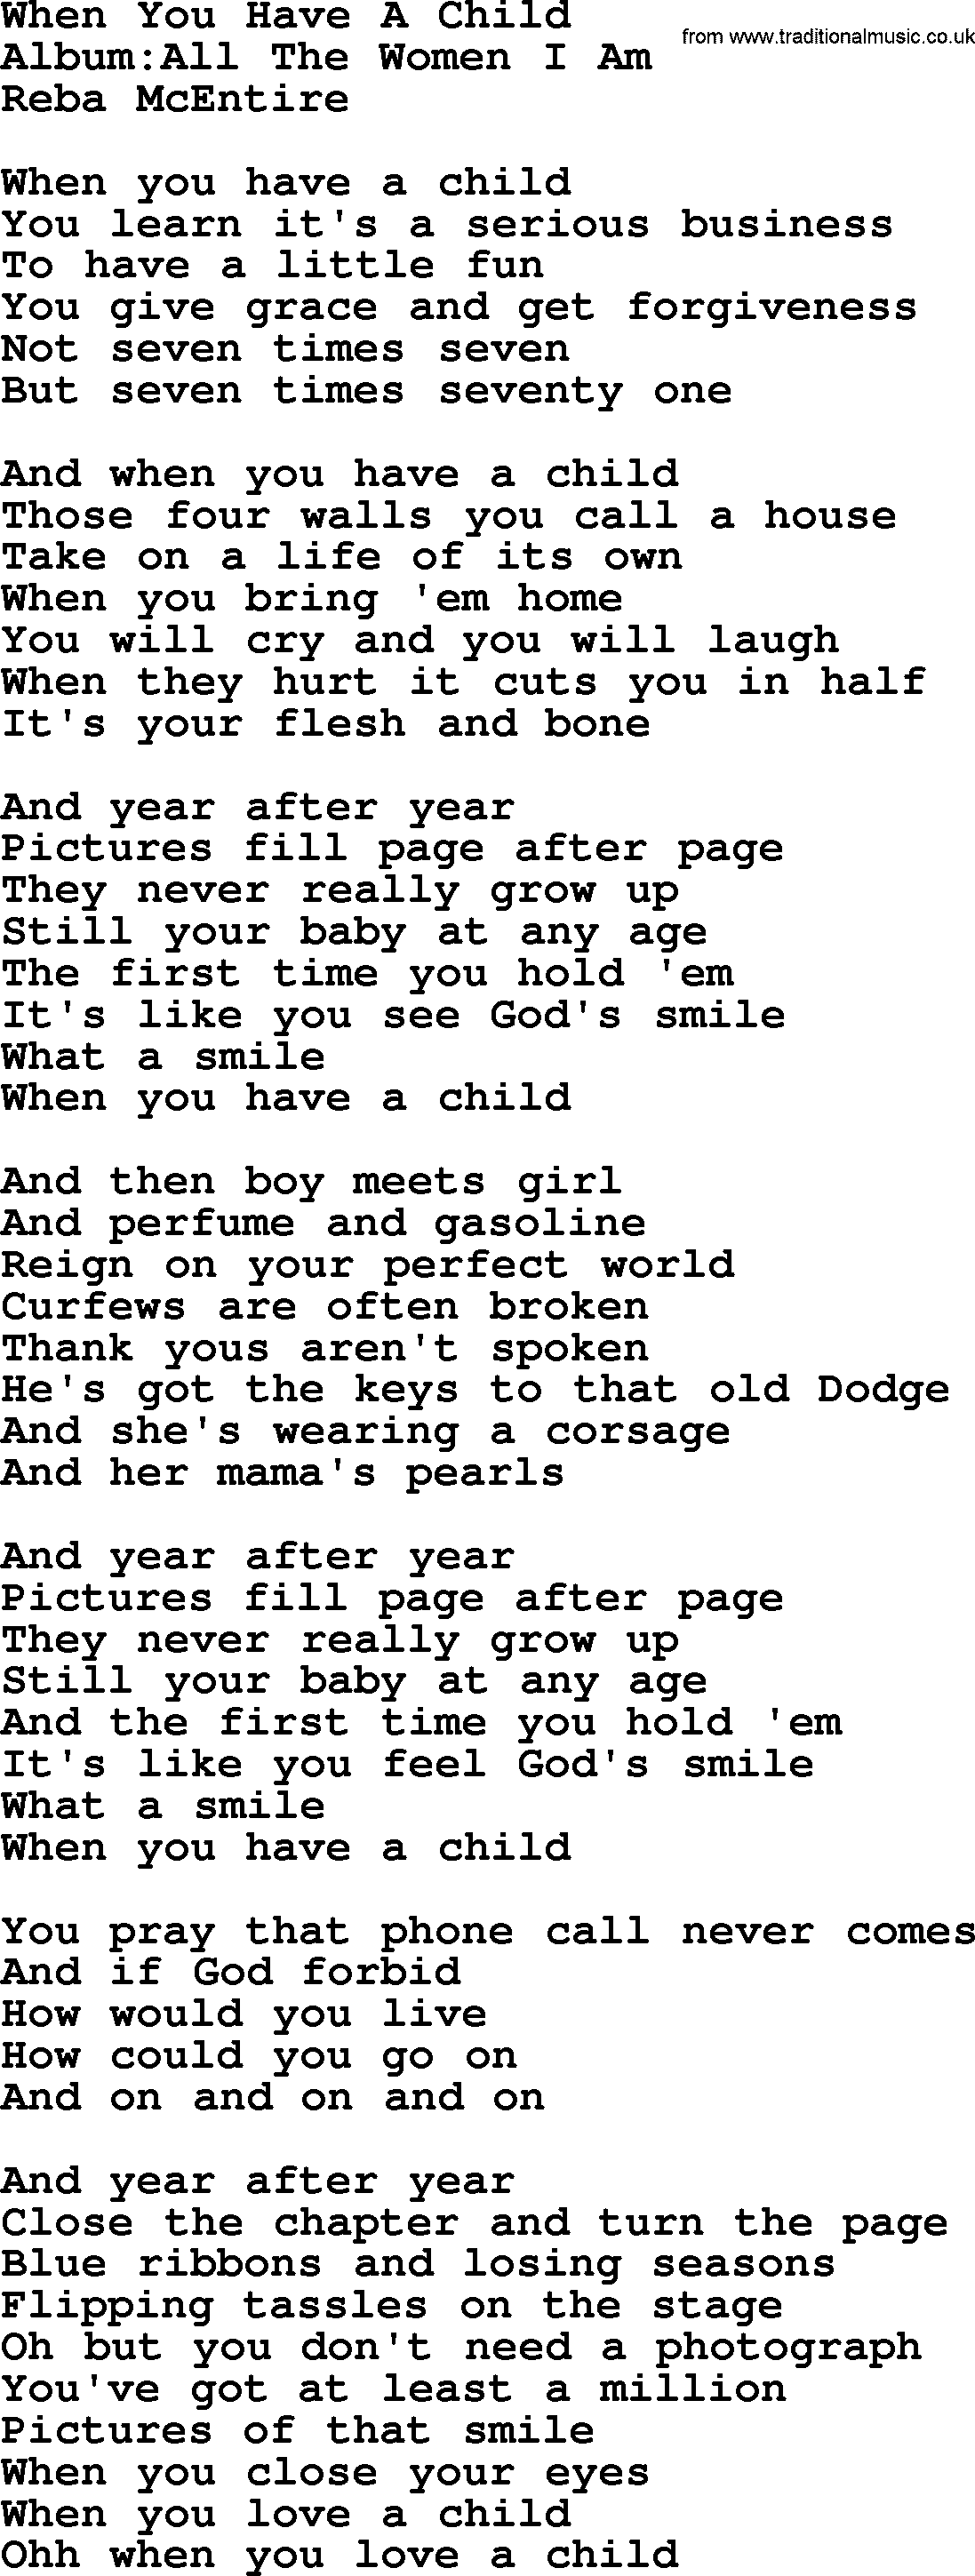 Reba McEntire song: When You Have A Child lyrics